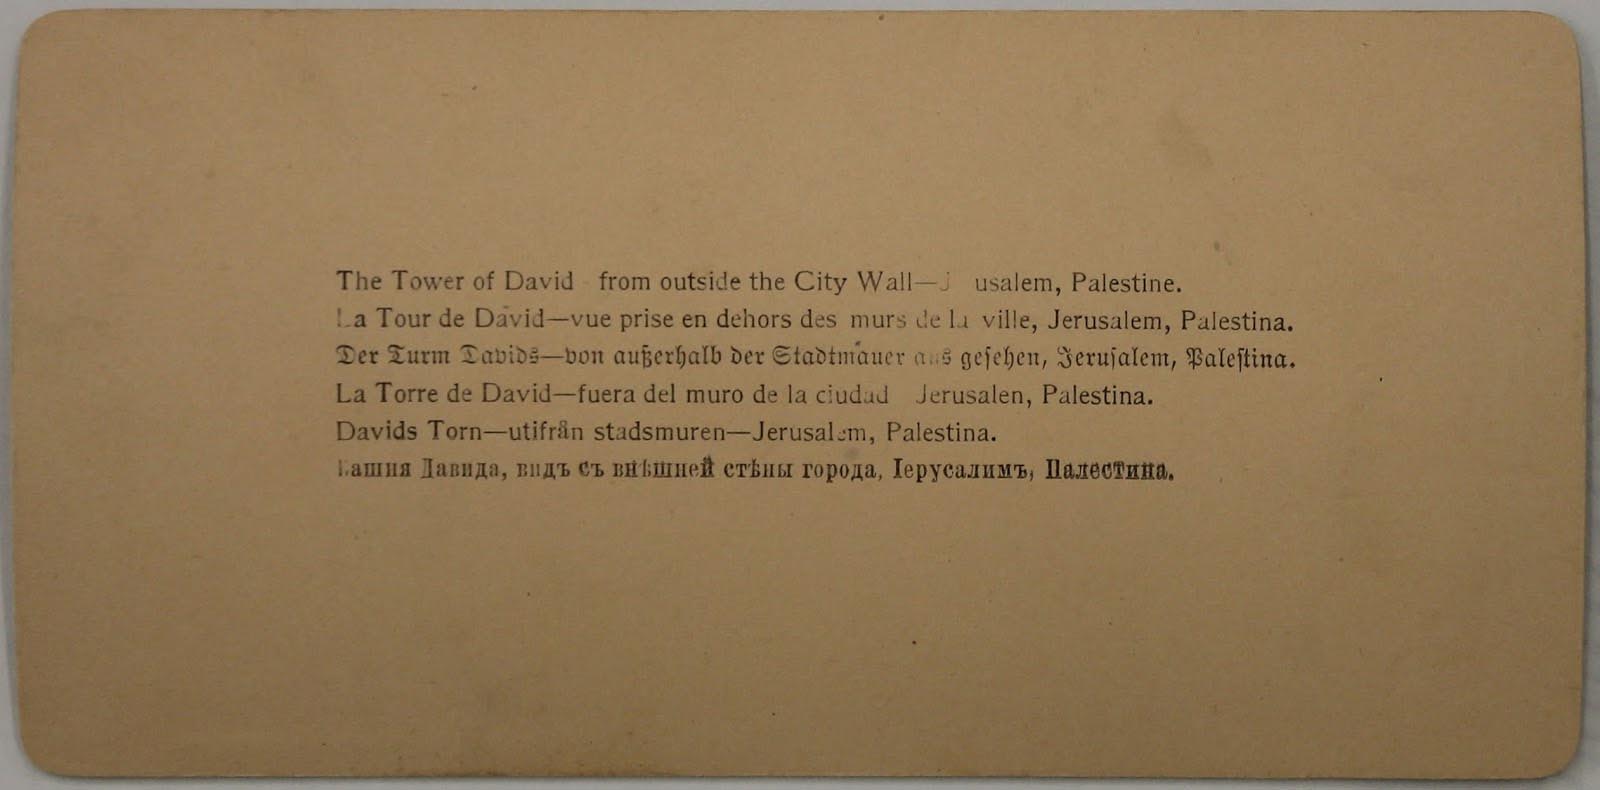 Label for stereotypic images of the Tower of David from outside the City Wall